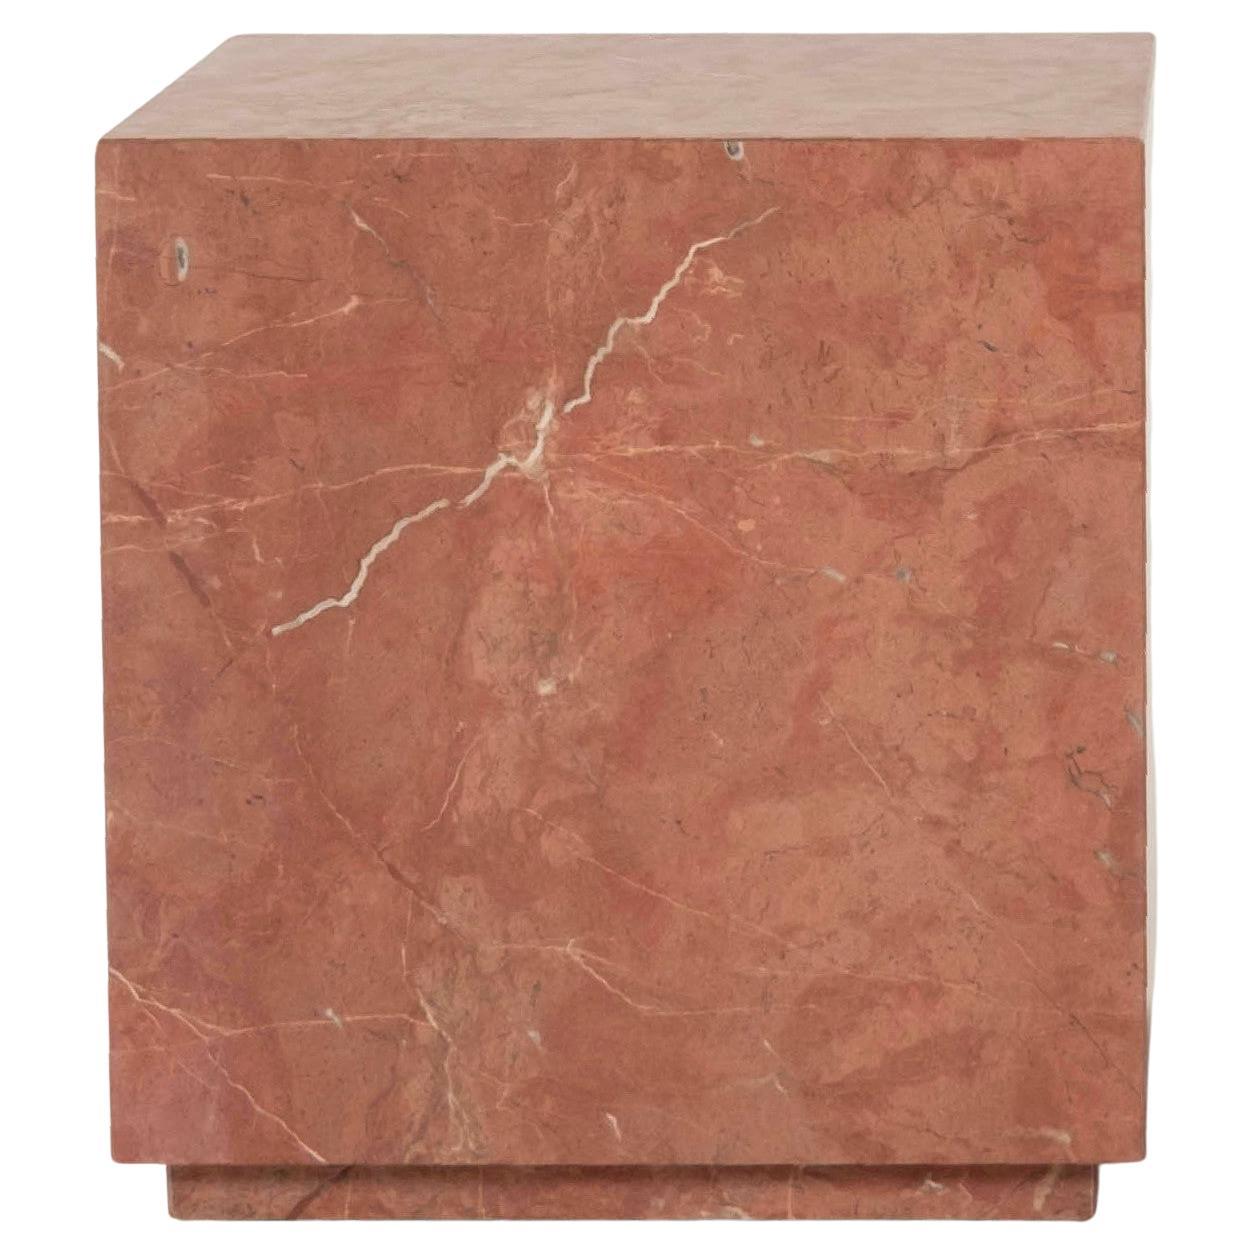 Rojo Alicante Marble Cube Occasional Side Table(s)